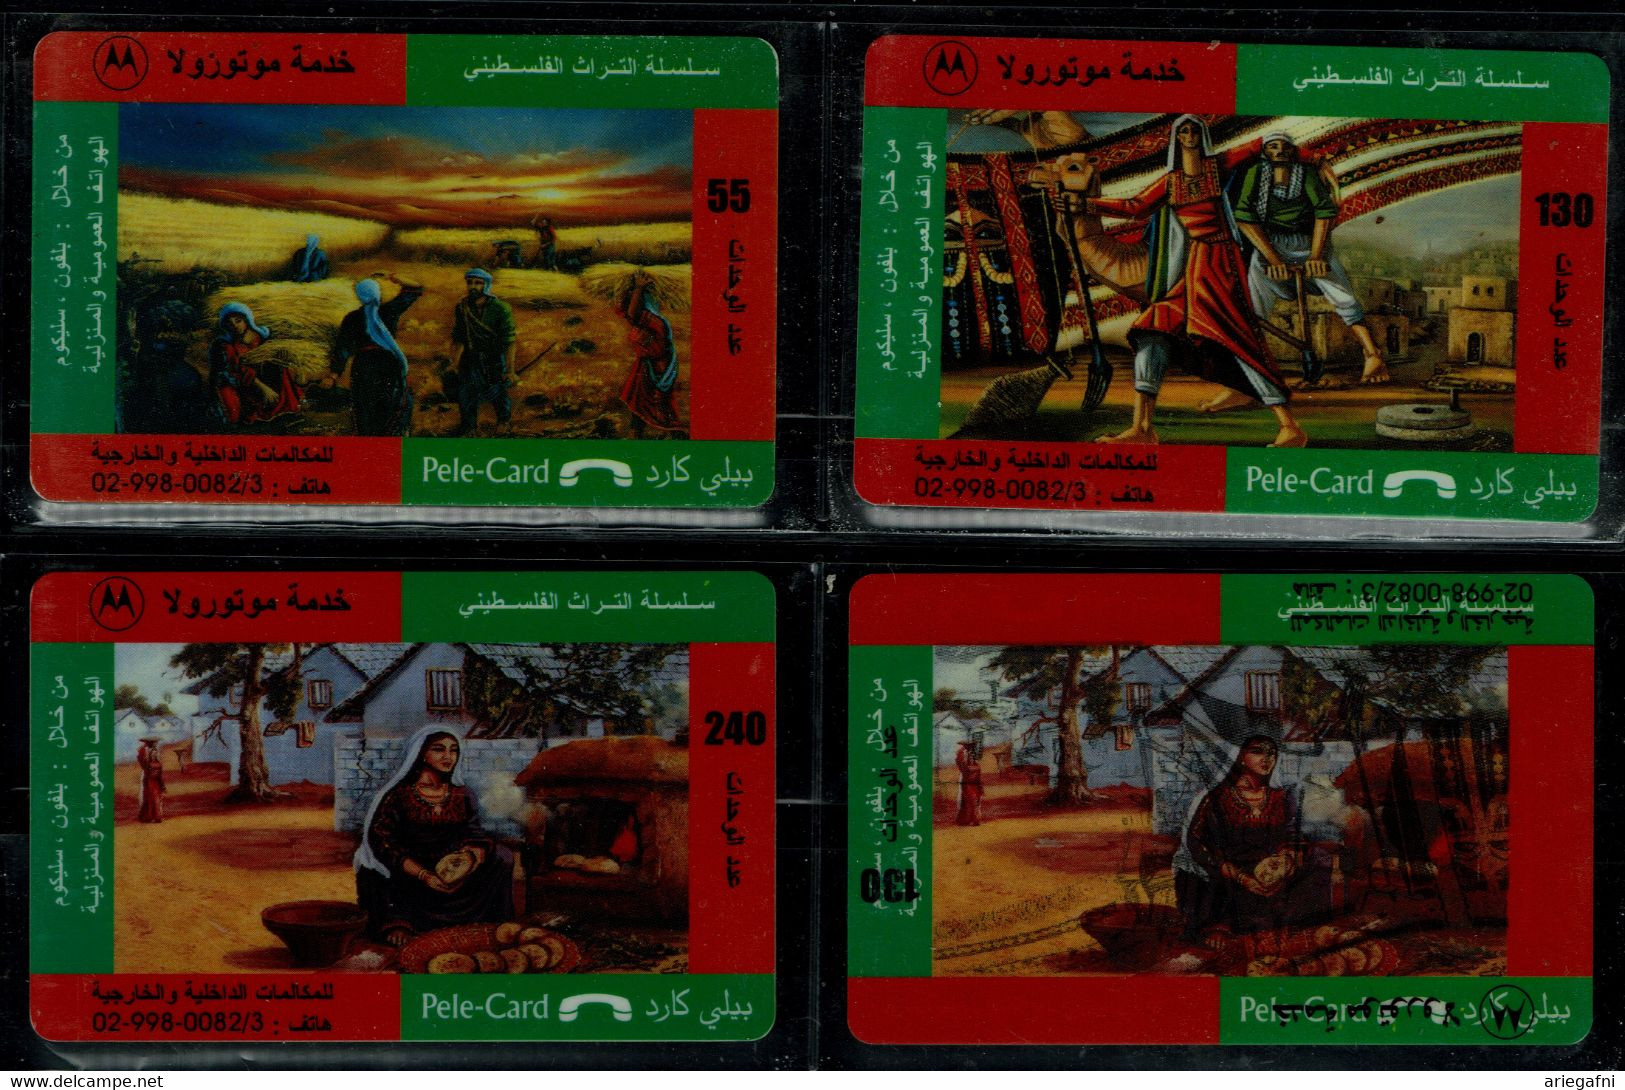 PALESTINE 1998 PRIVATE PHONECARD BABLE HISTORY SET OF 4 CARD WITH ONE CARD ERRORS INVERTED INSCRIPTIONS  MINT VF!! - Palestine